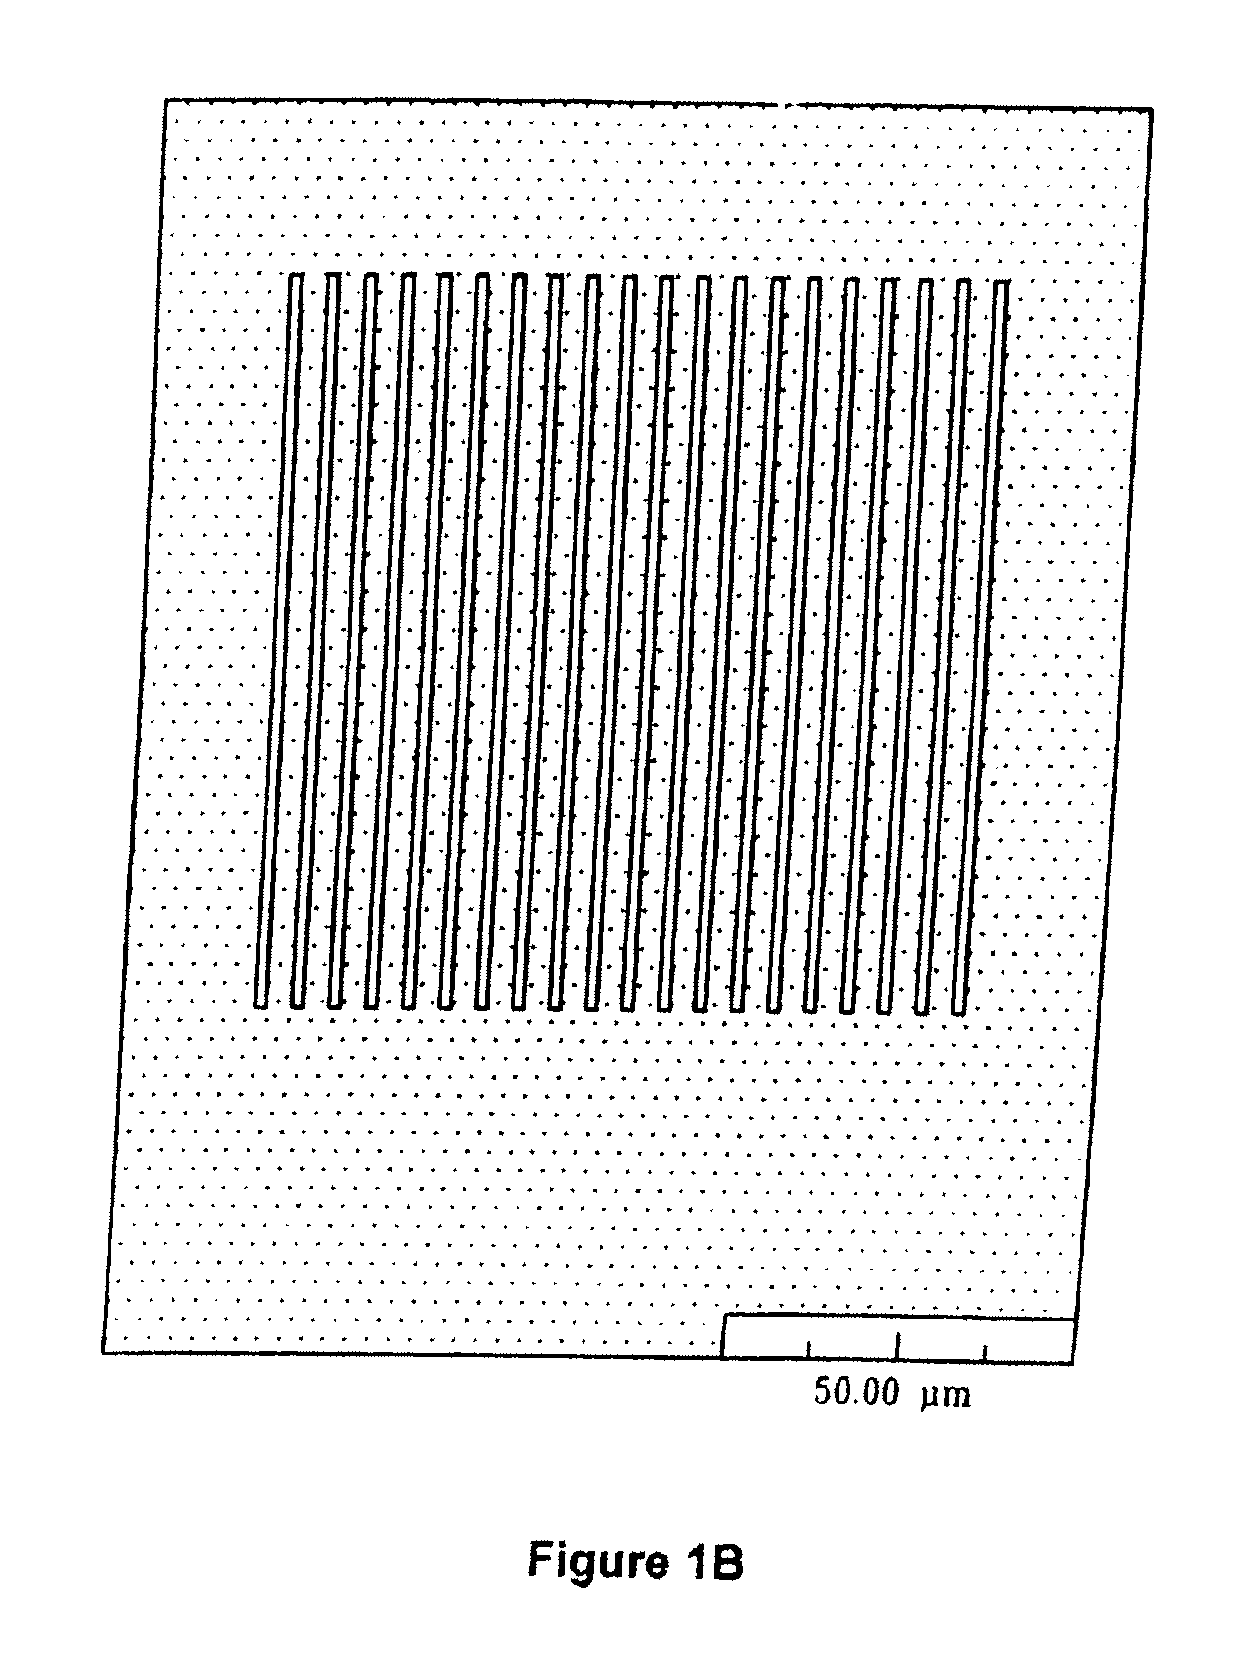 Method for Modifying the Refractive Index of an Optical Material and Resulting Optical Vision Component